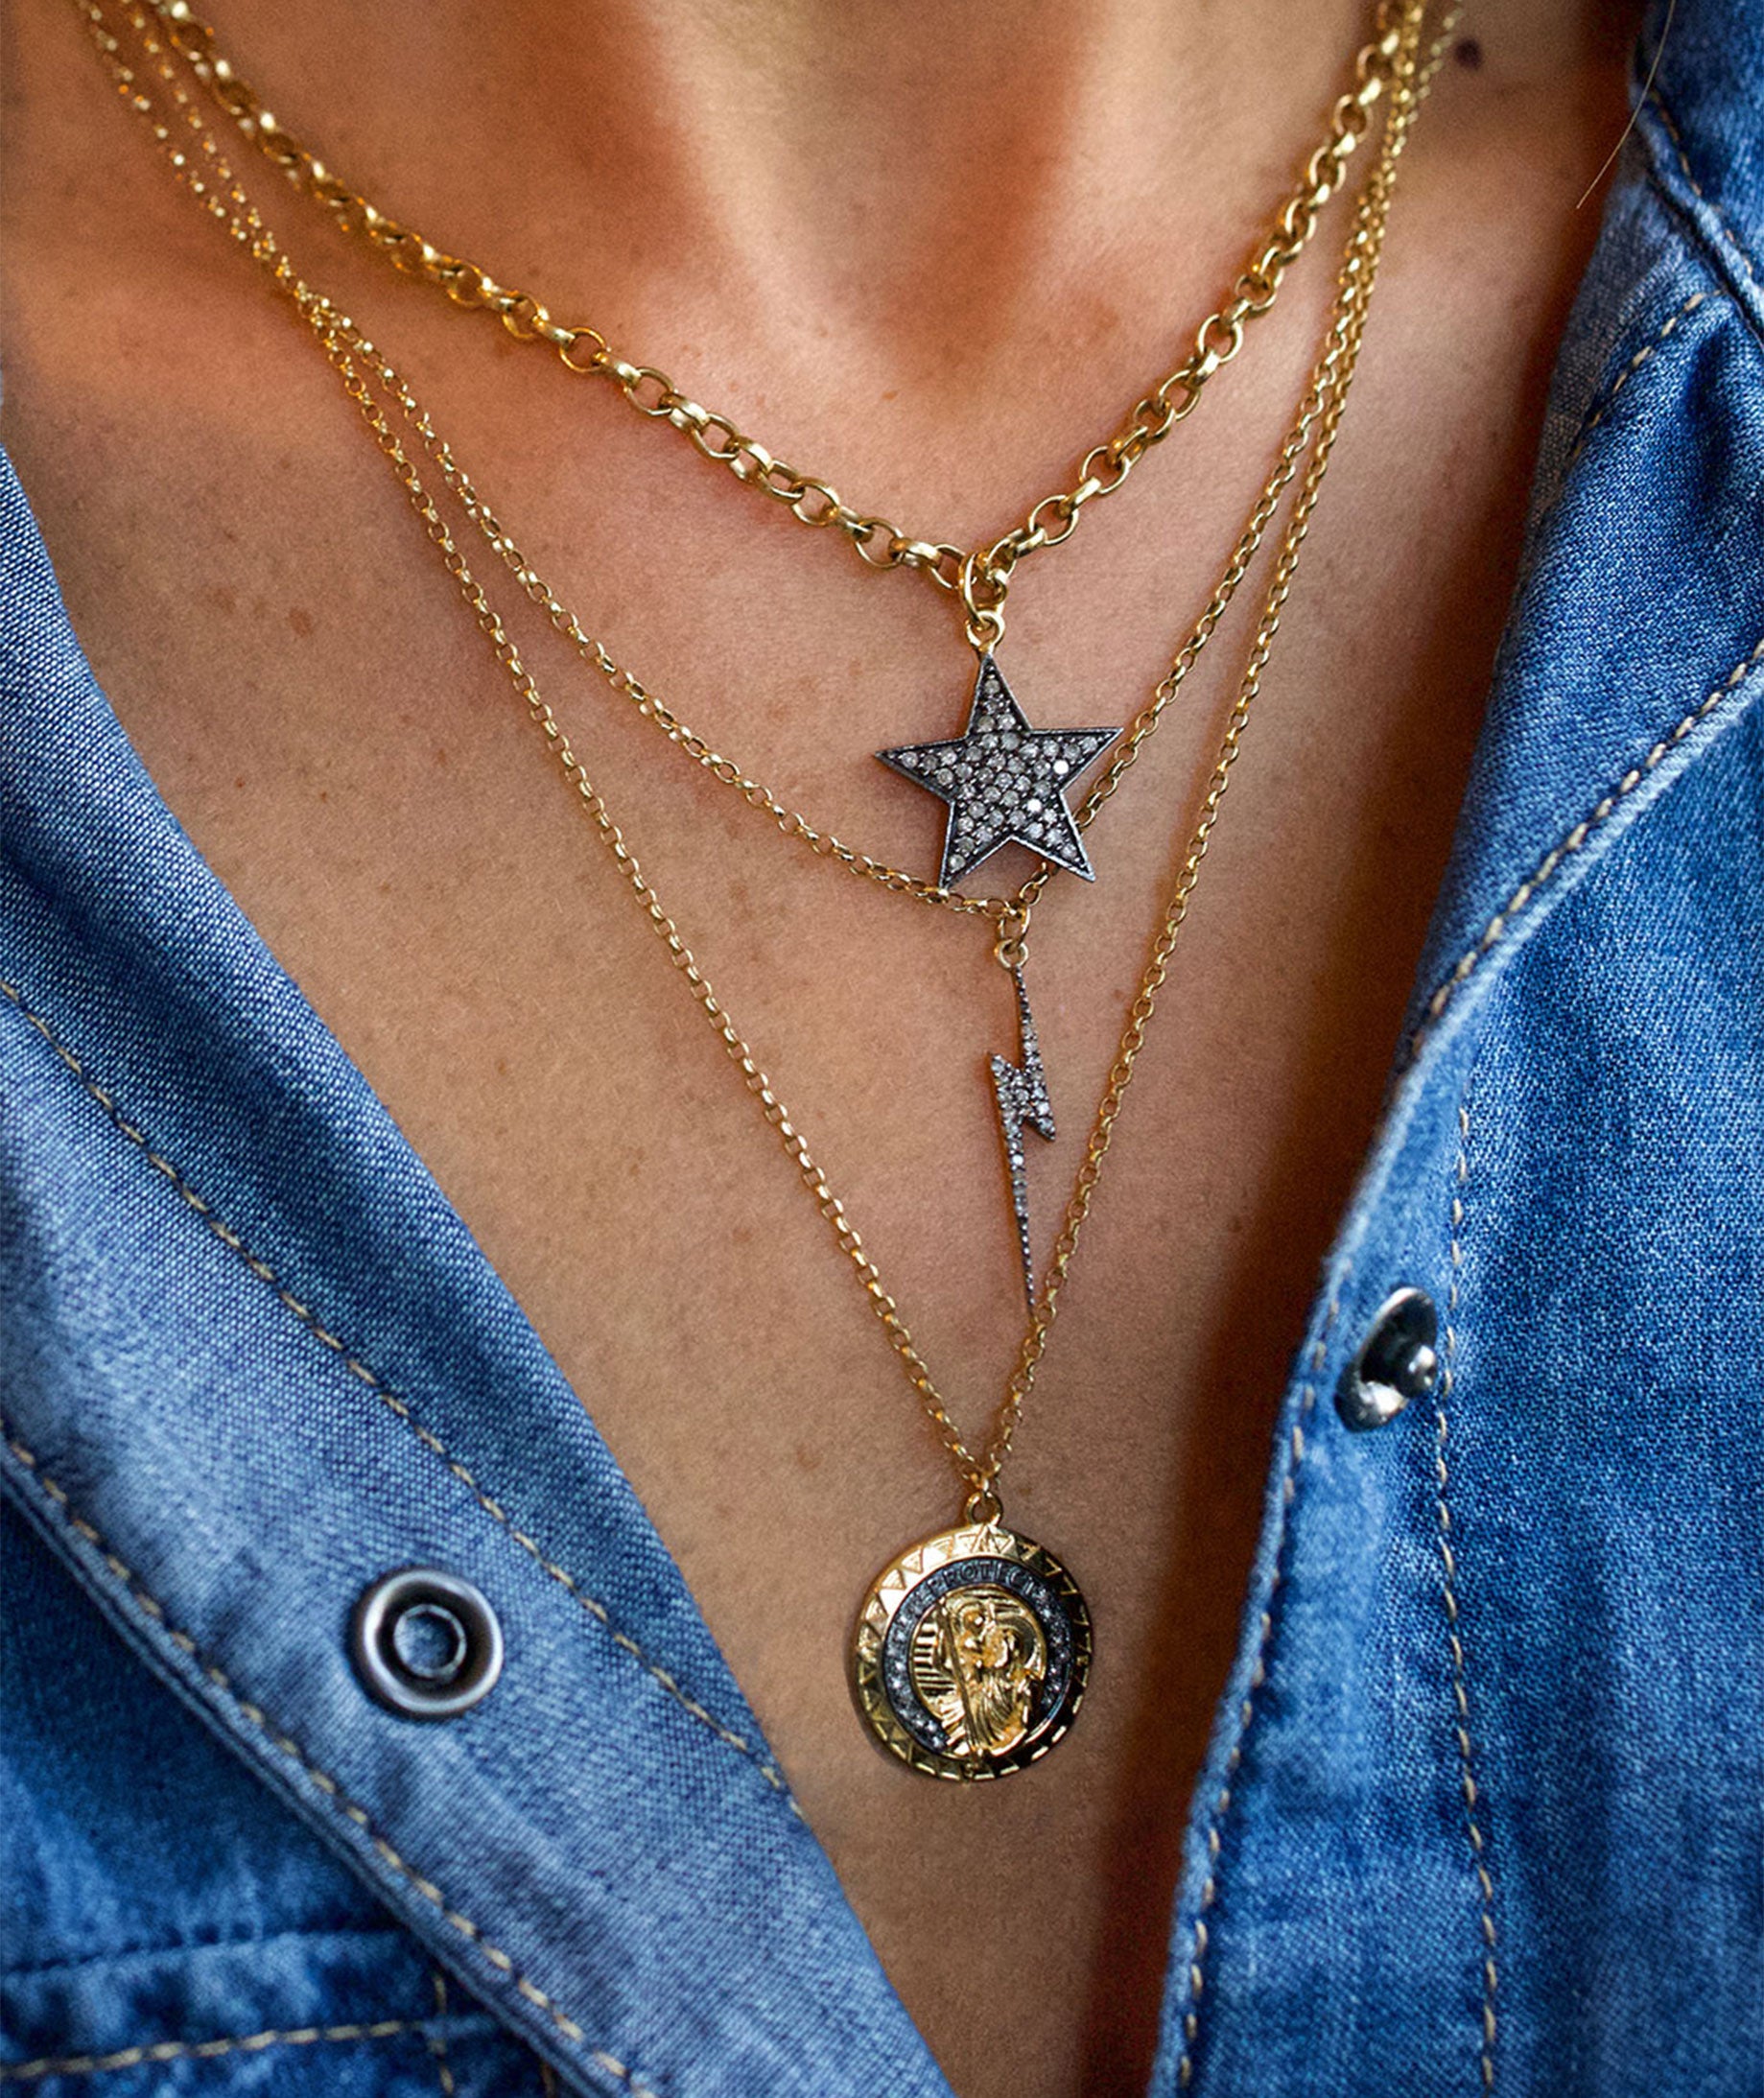 star and st christopher gold necklaces.jpeg__PID:636b06fc-c0ac-4588-9cf9-62dc8ae378af